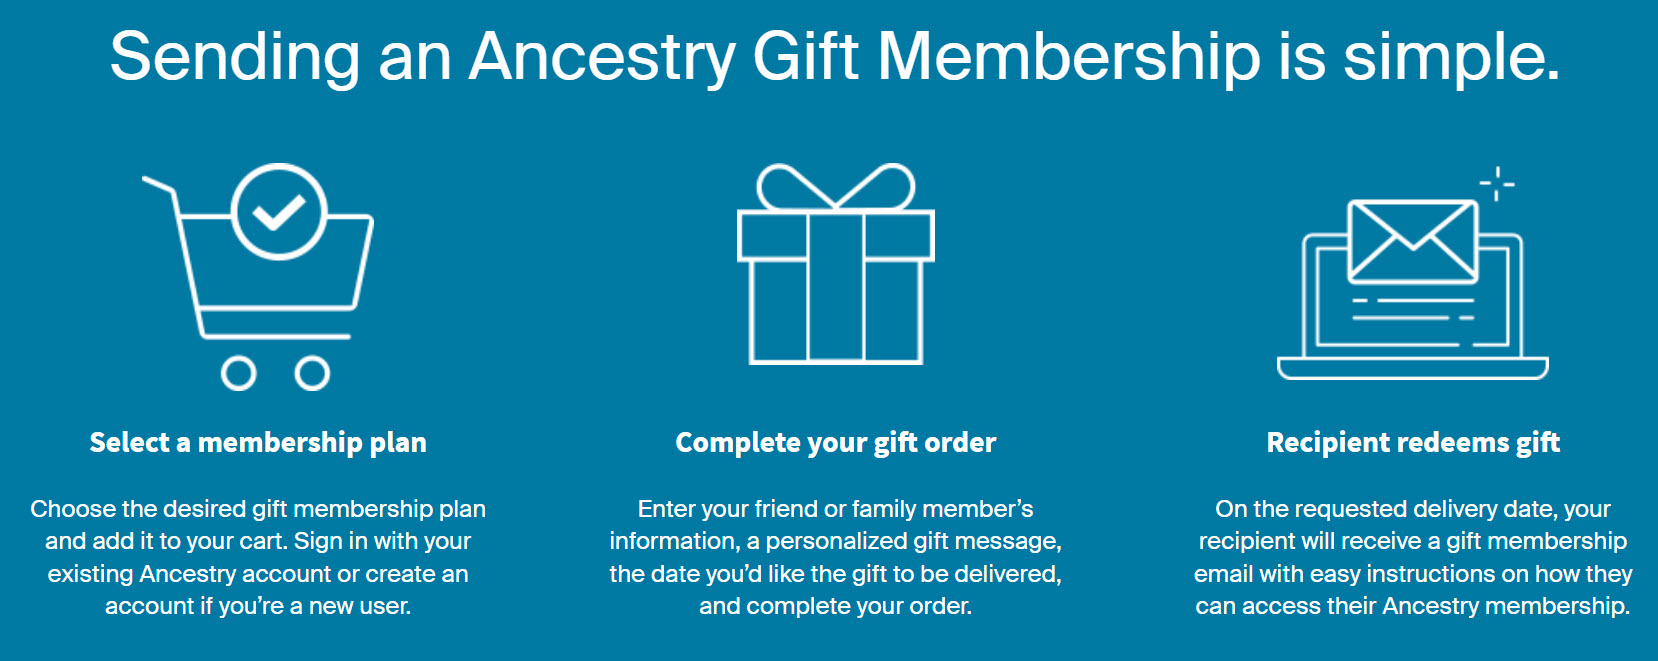 Ancestry Gift Membership Holiday Offer 2023